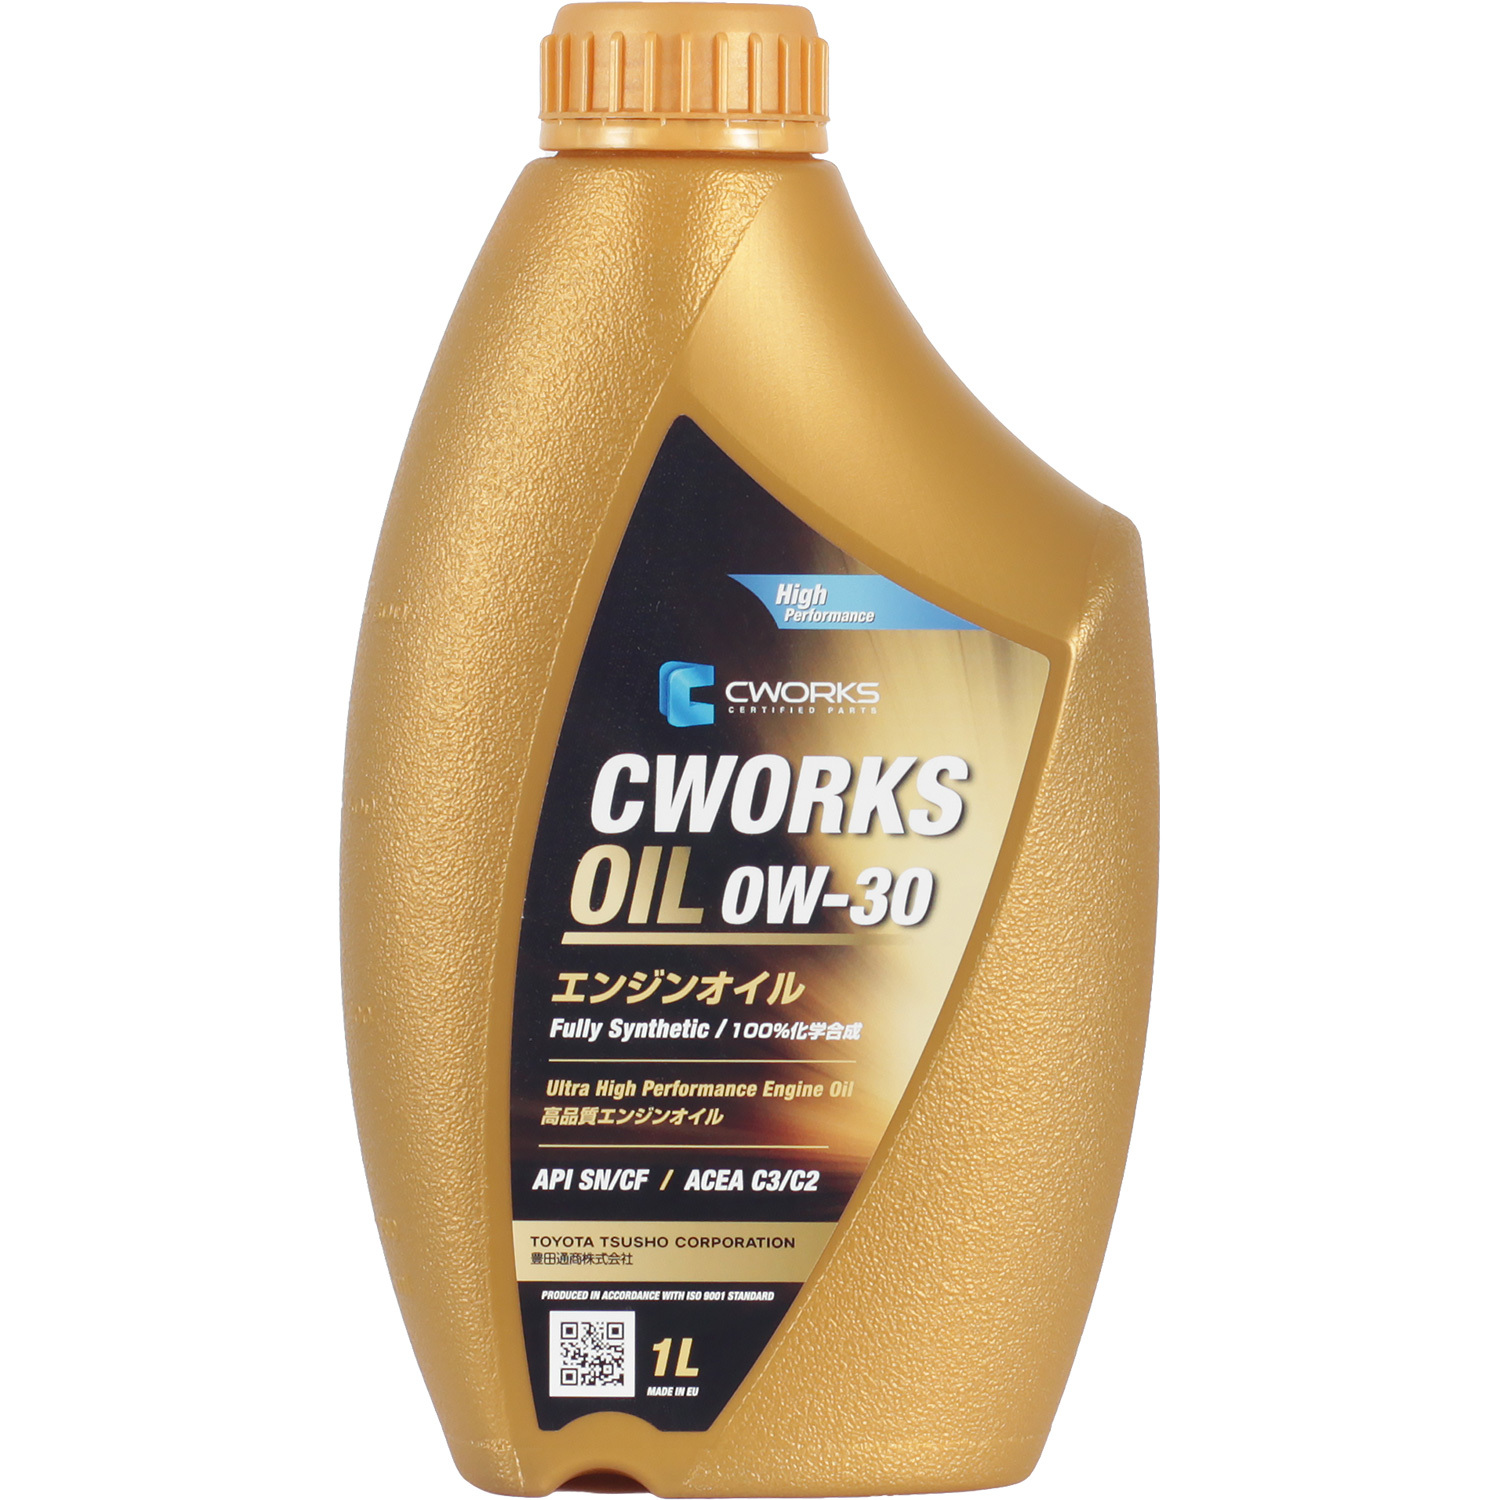 CWORKS Масло моторное Cworks OIL С2/С3 0W-30 1л cworks масло моторное cworks oil с2 с3 0w 30 4л